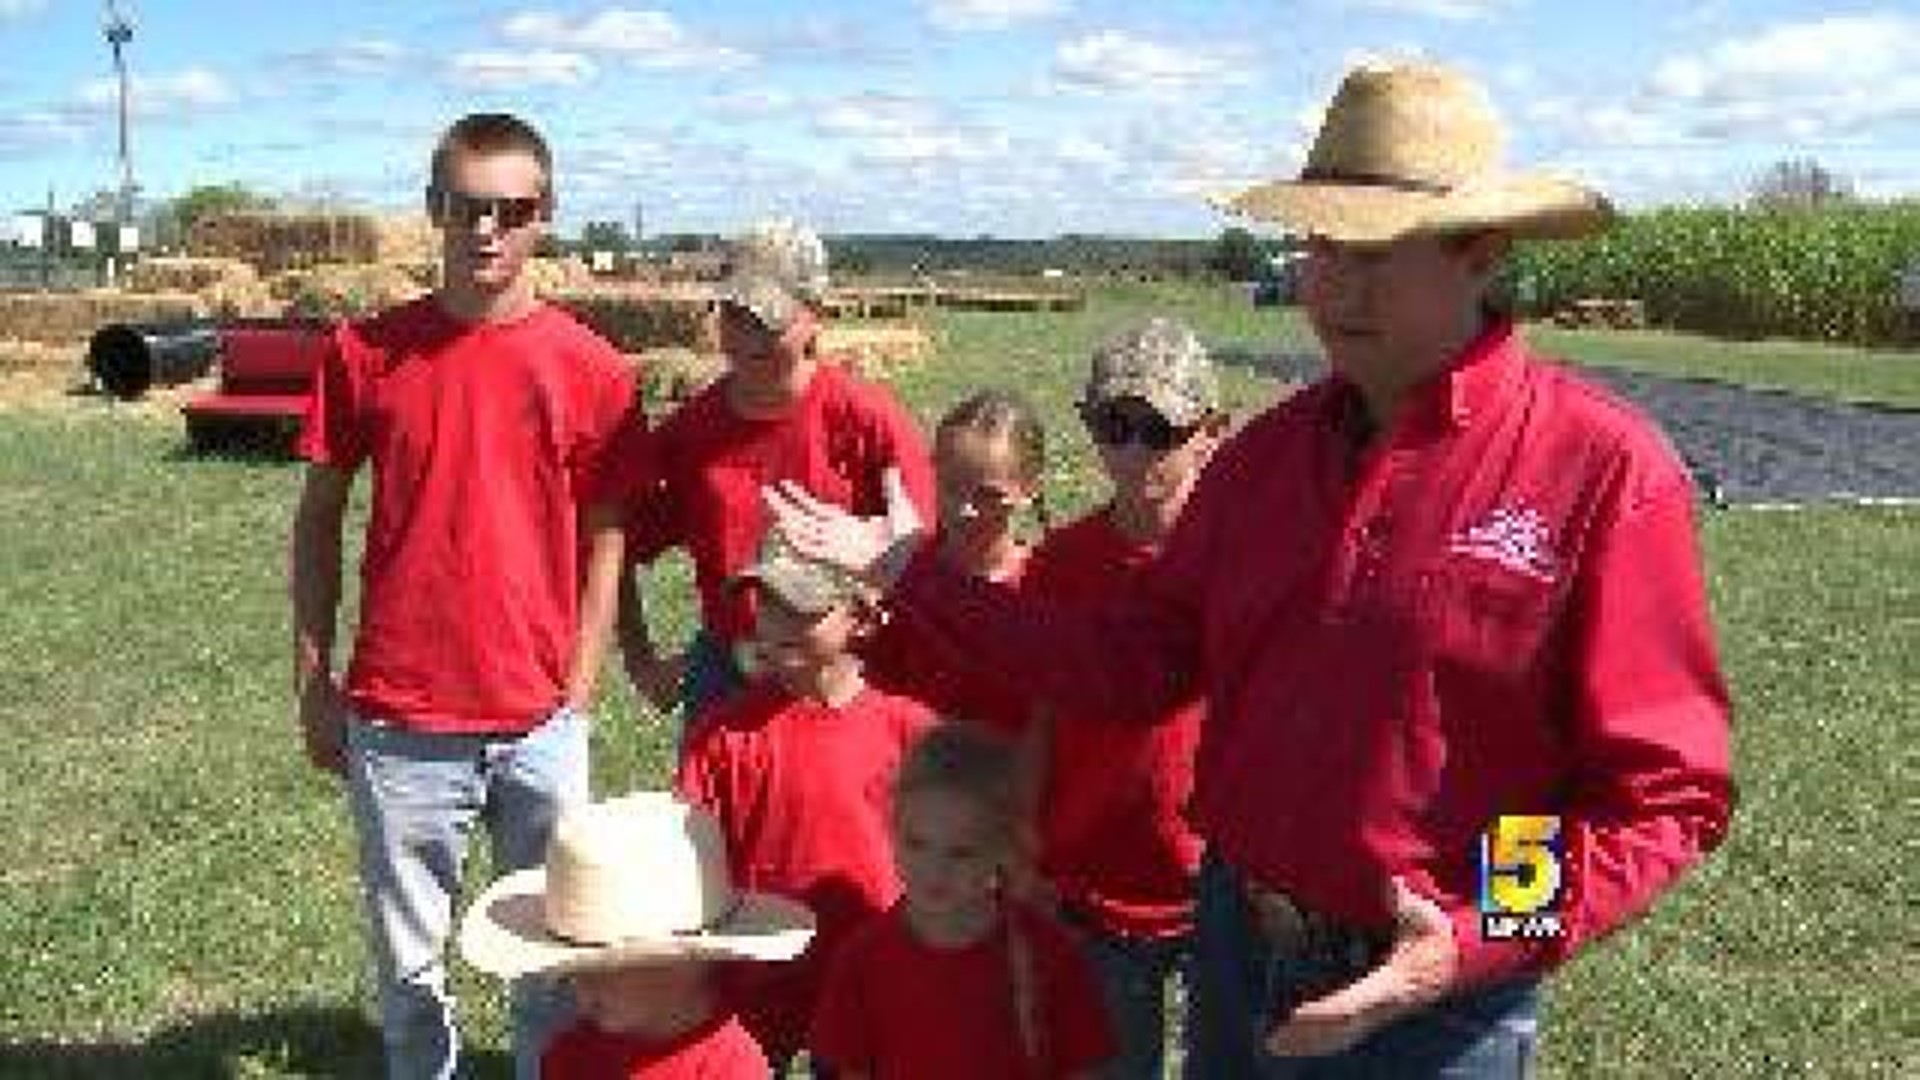 Farmland Adventures in Springdale Attracts Thousands